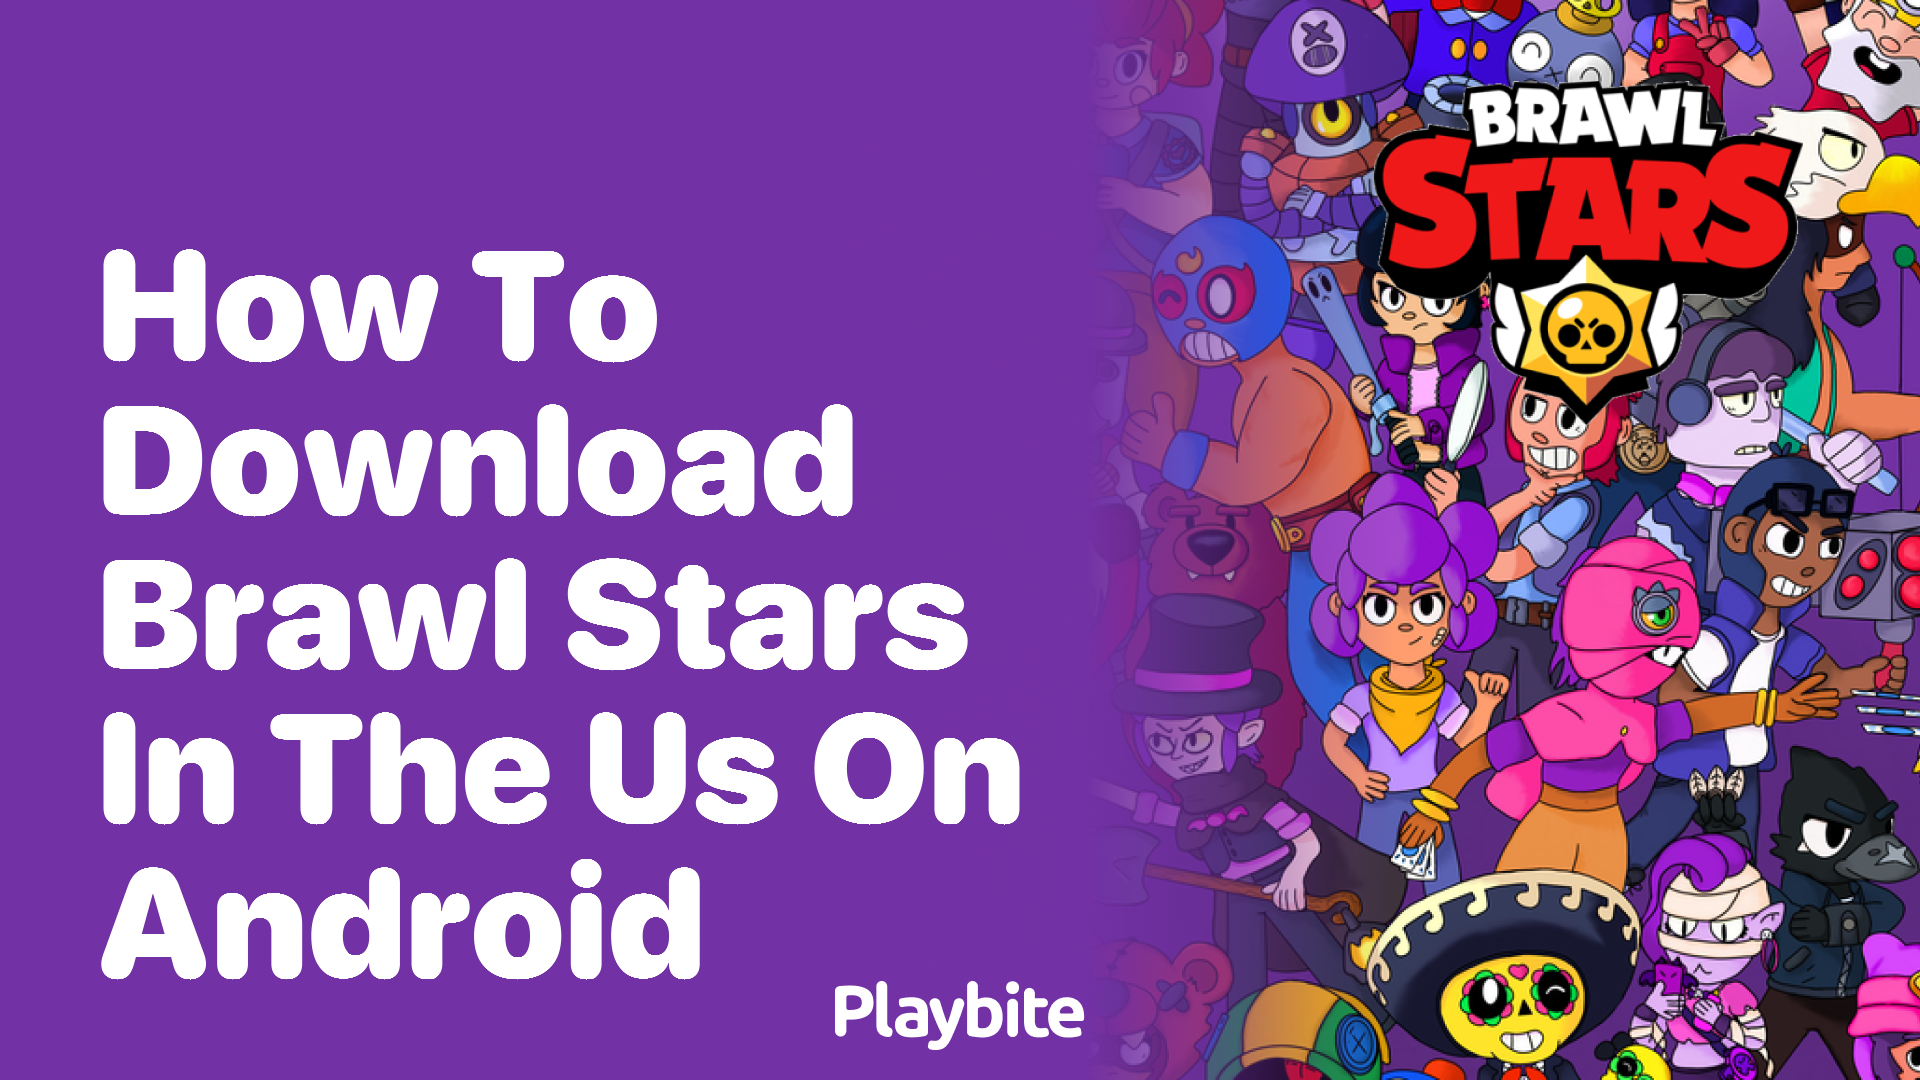 How to download Brawl Stars on Android